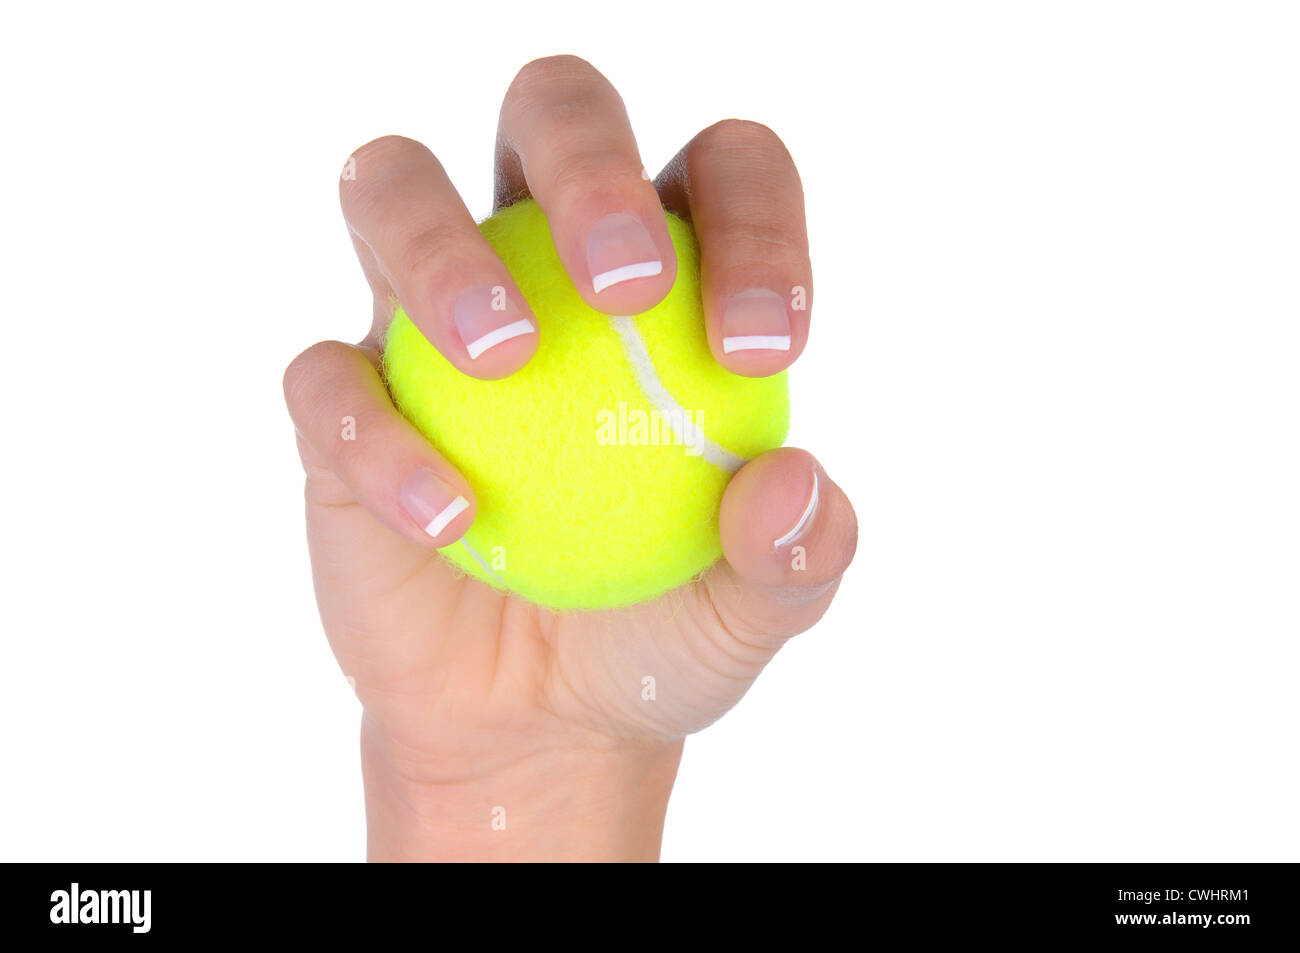 Closeup of woman's hand holding a tennis ball over a white background. Stock Photo